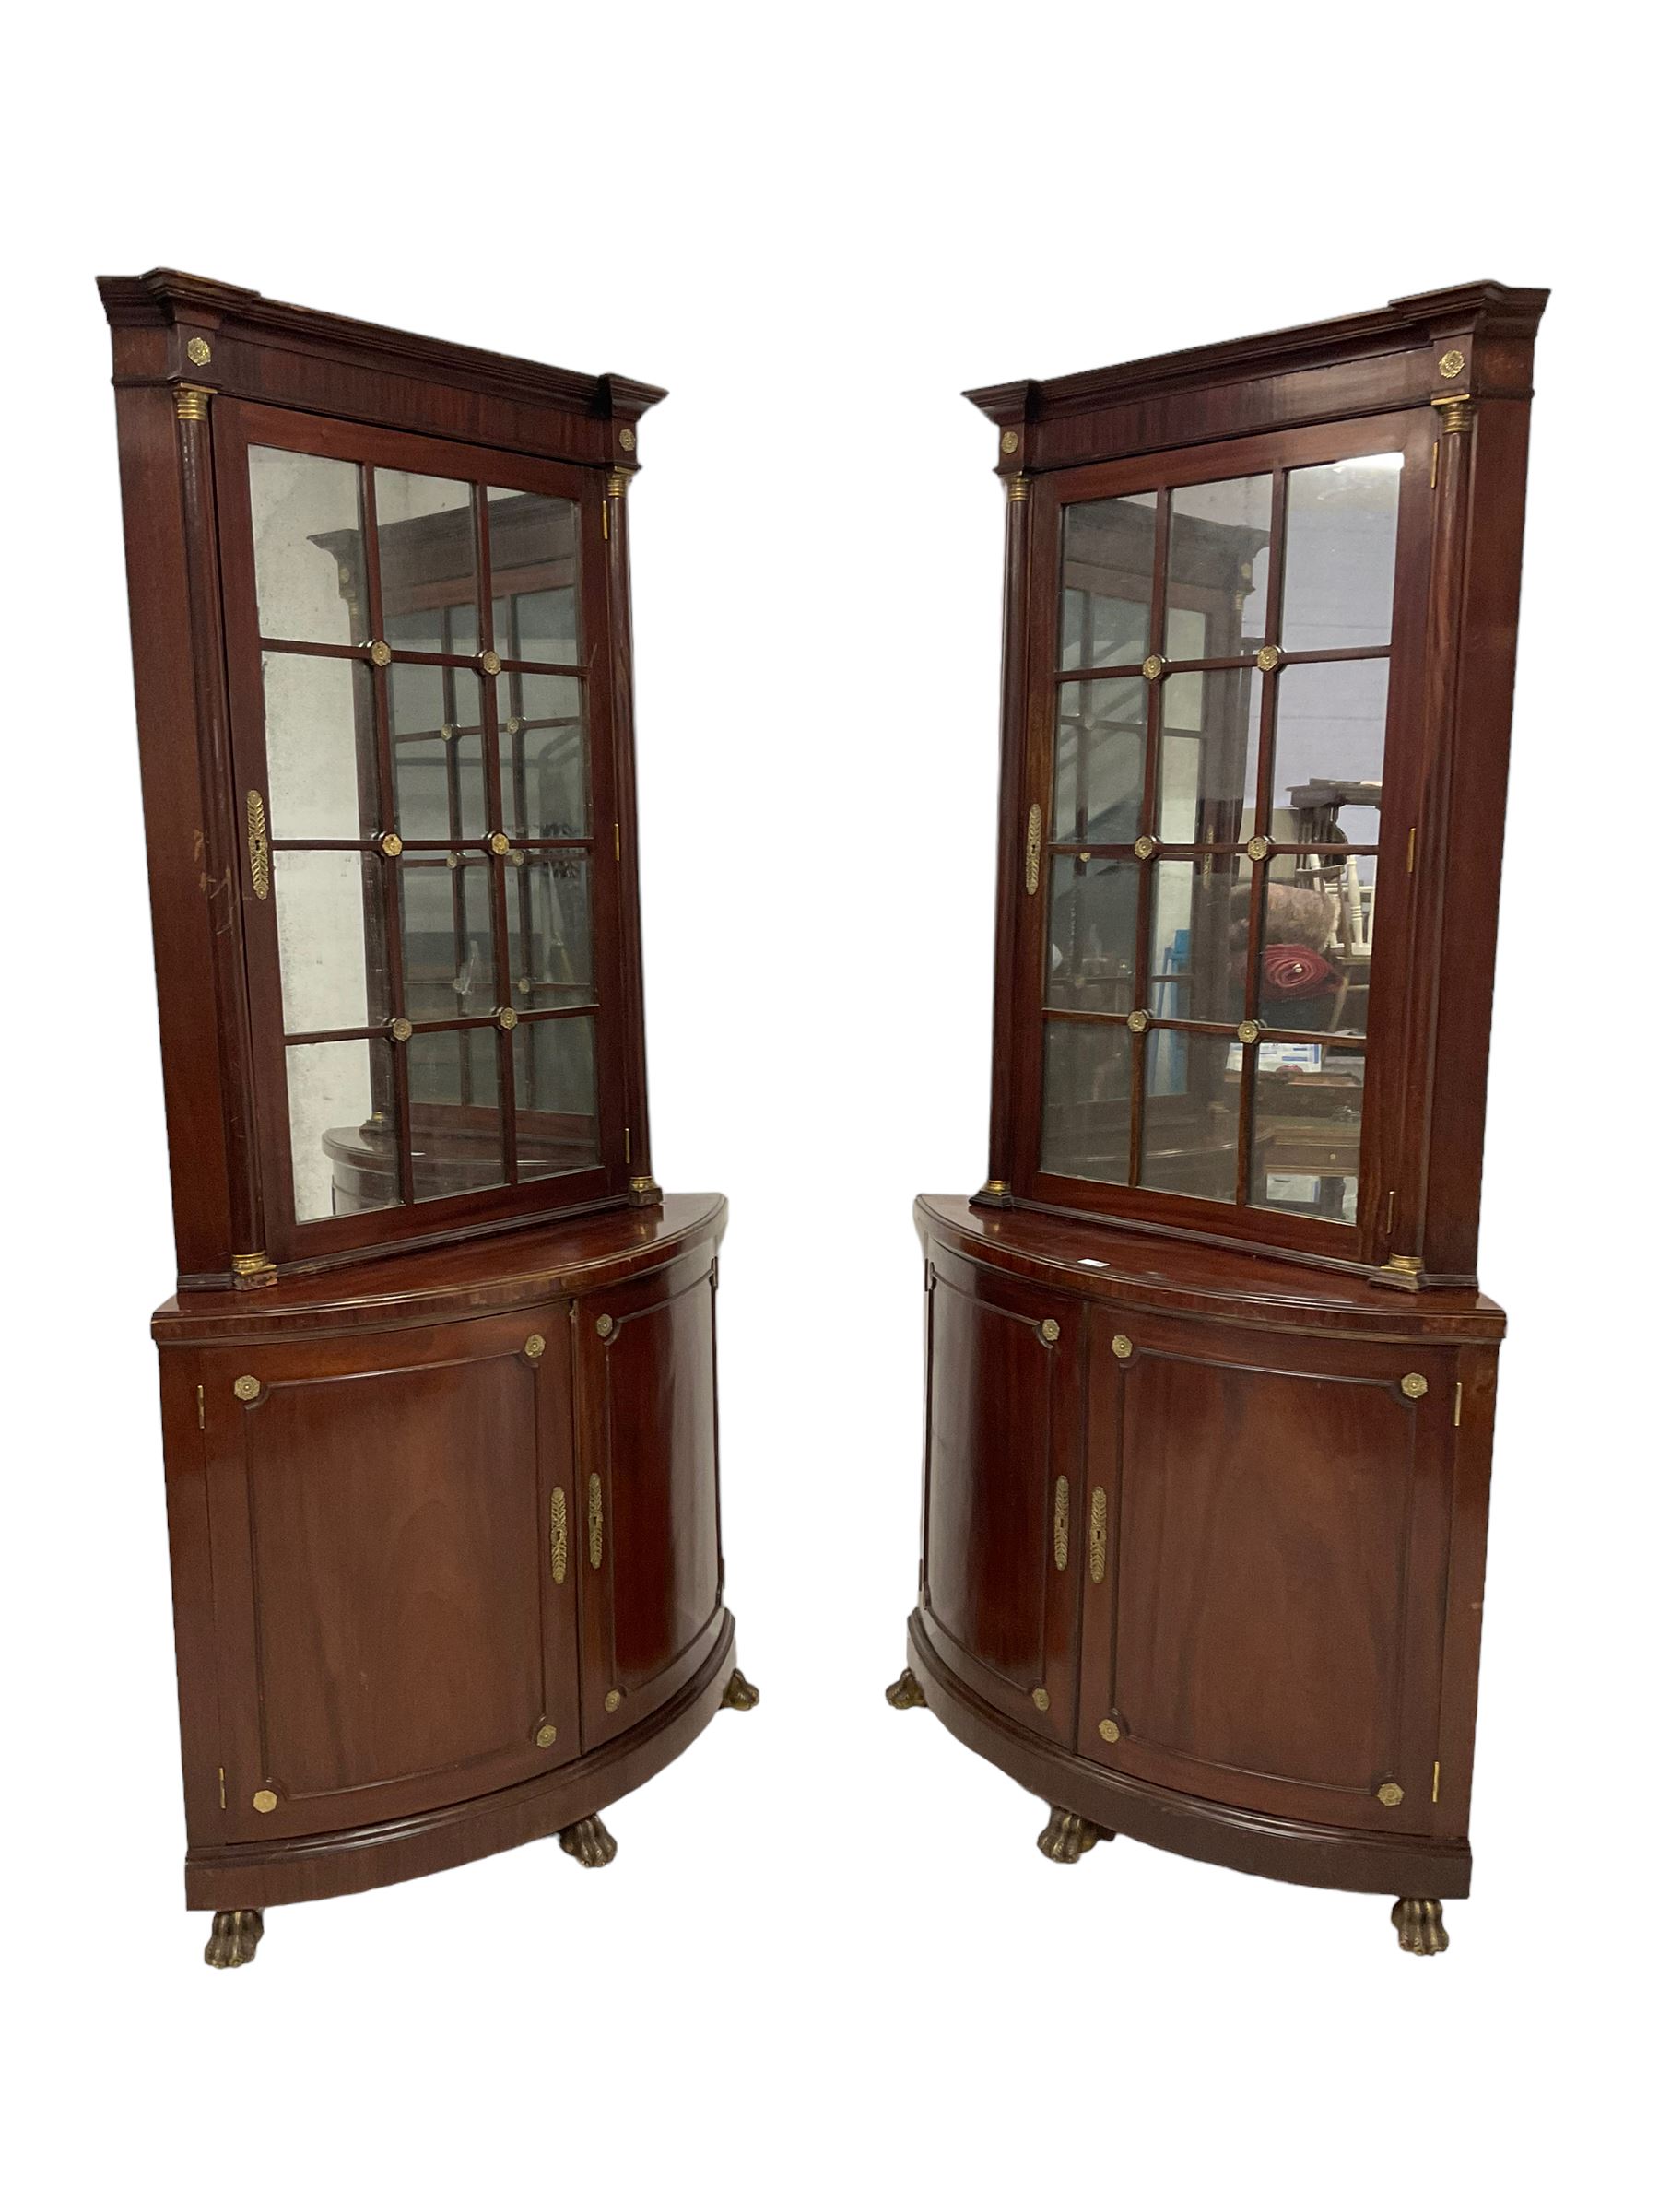 Pair of French Empire design corner cabinets - Image 10 of 10